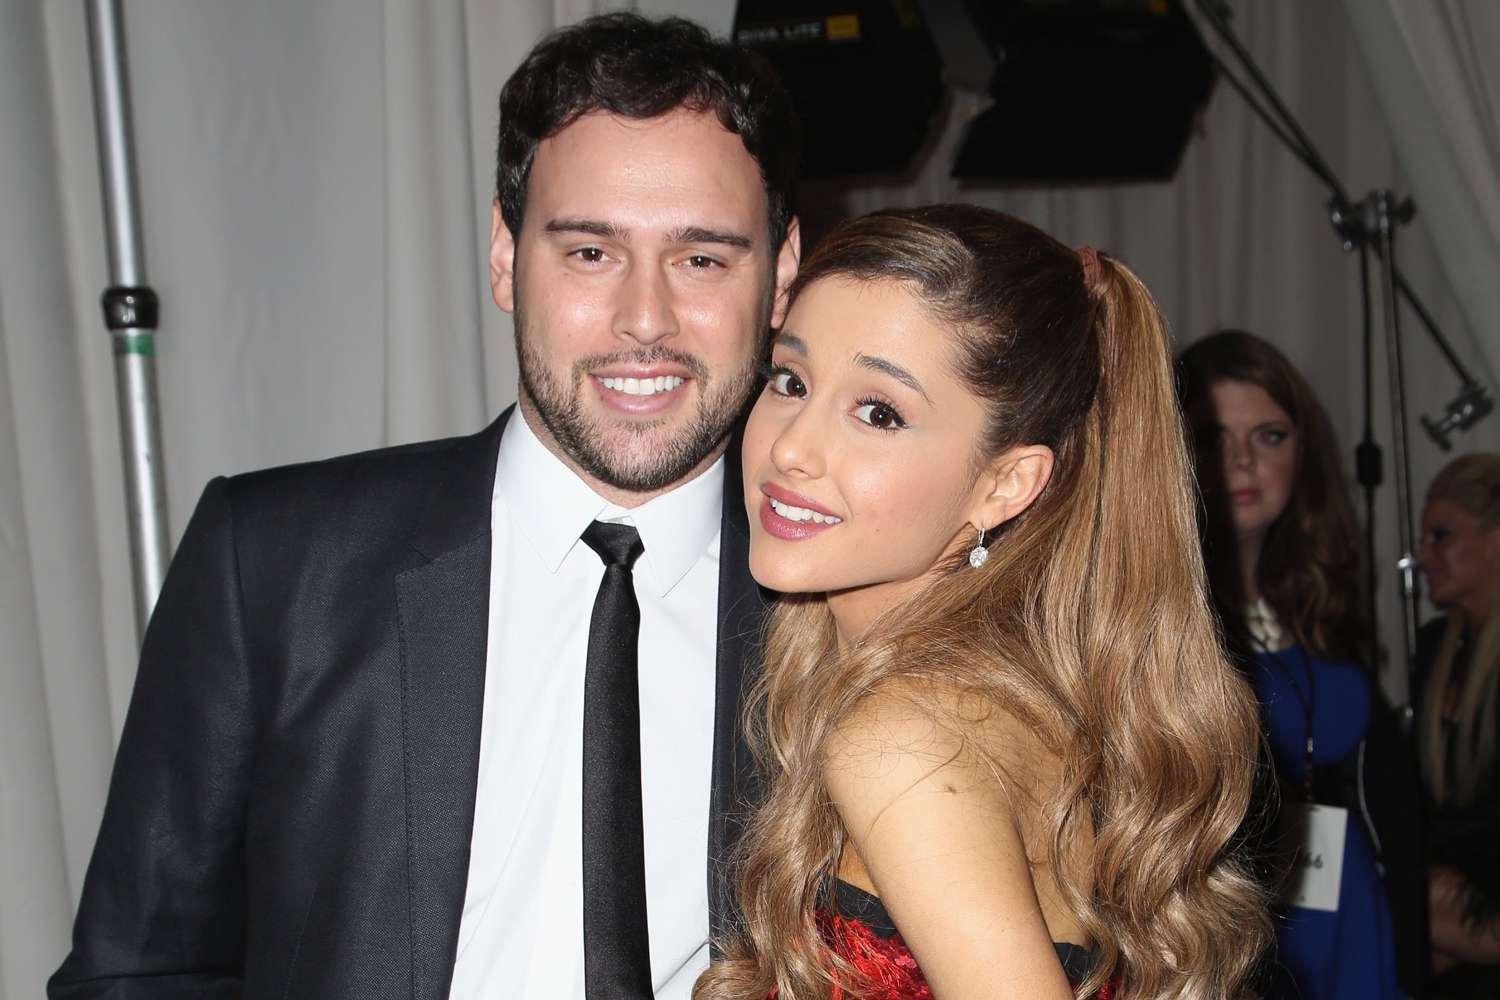 Why Ariana Grande Is Leaving Scooter Braun: Source (Exclusive)